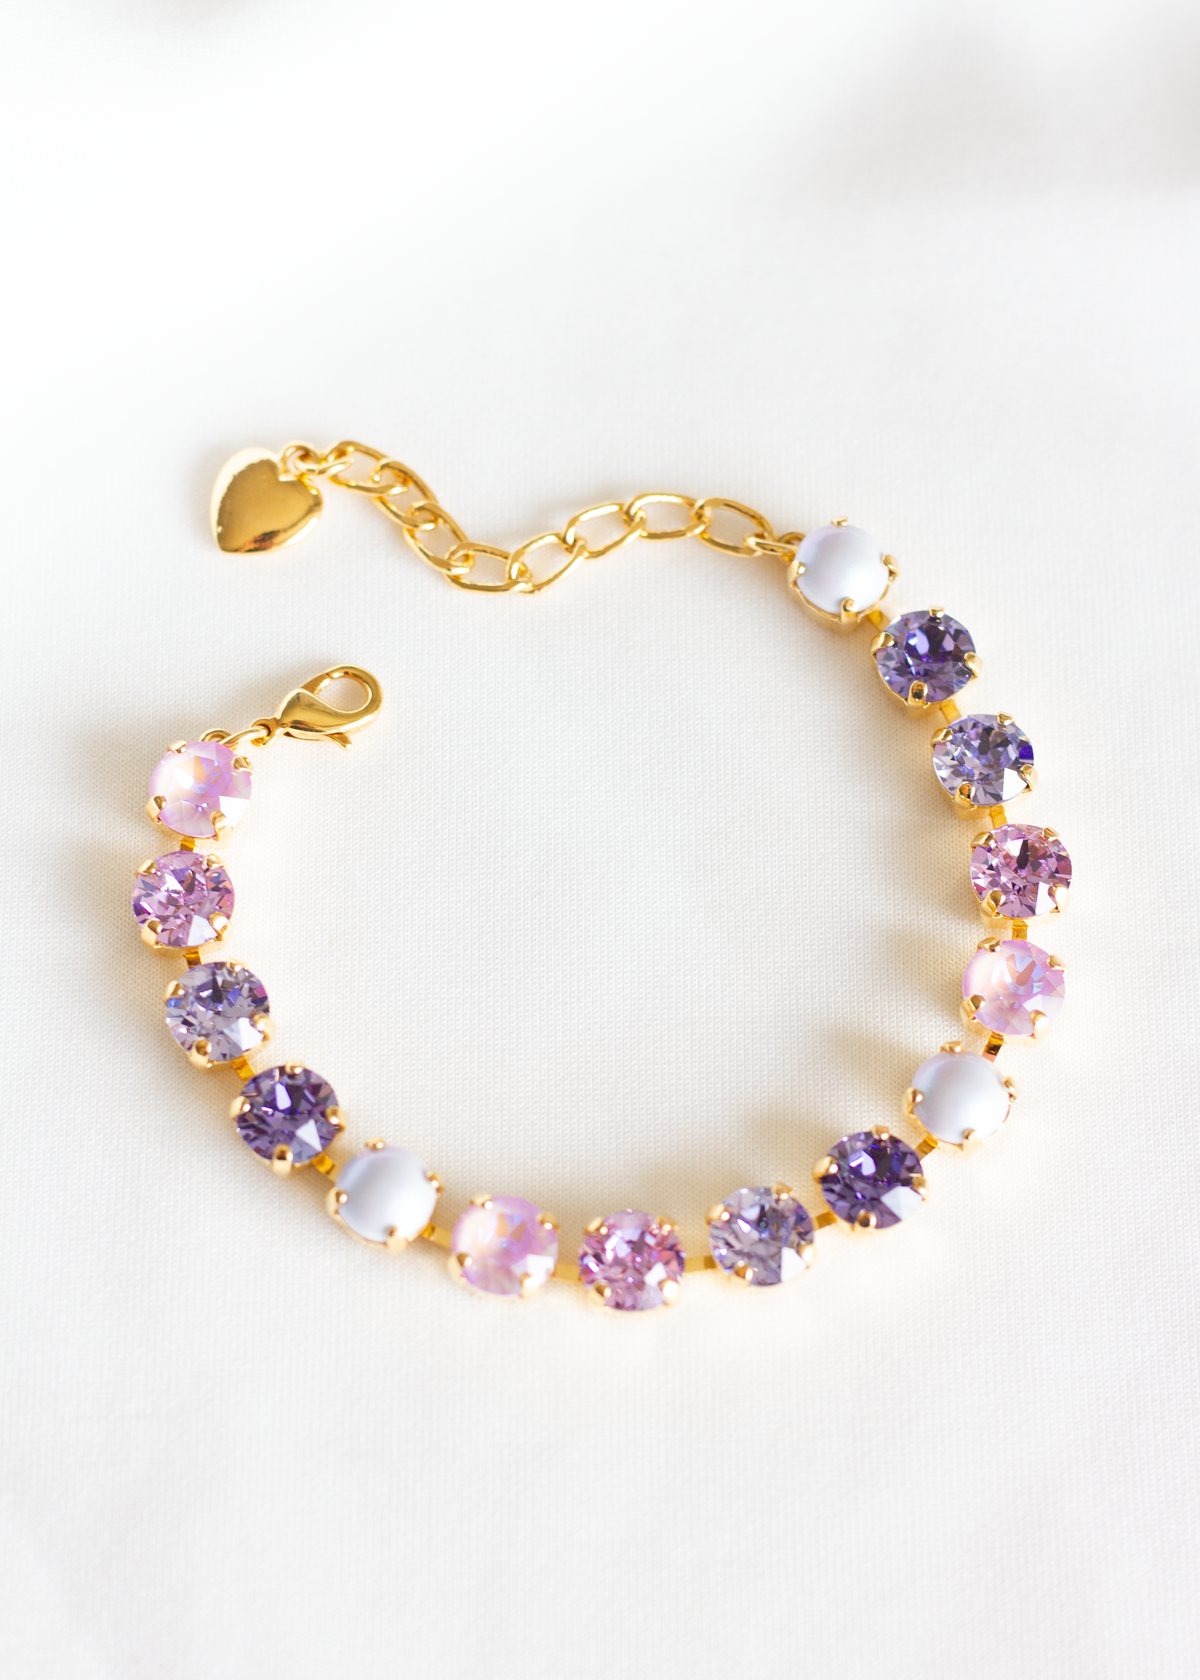 Sparkling Stars Bracelet, jewelry designed and made by Sarah Gauci in Malta. 8mm Crystals. Lilac Clouds. Gold Plated or Rose Gold. 